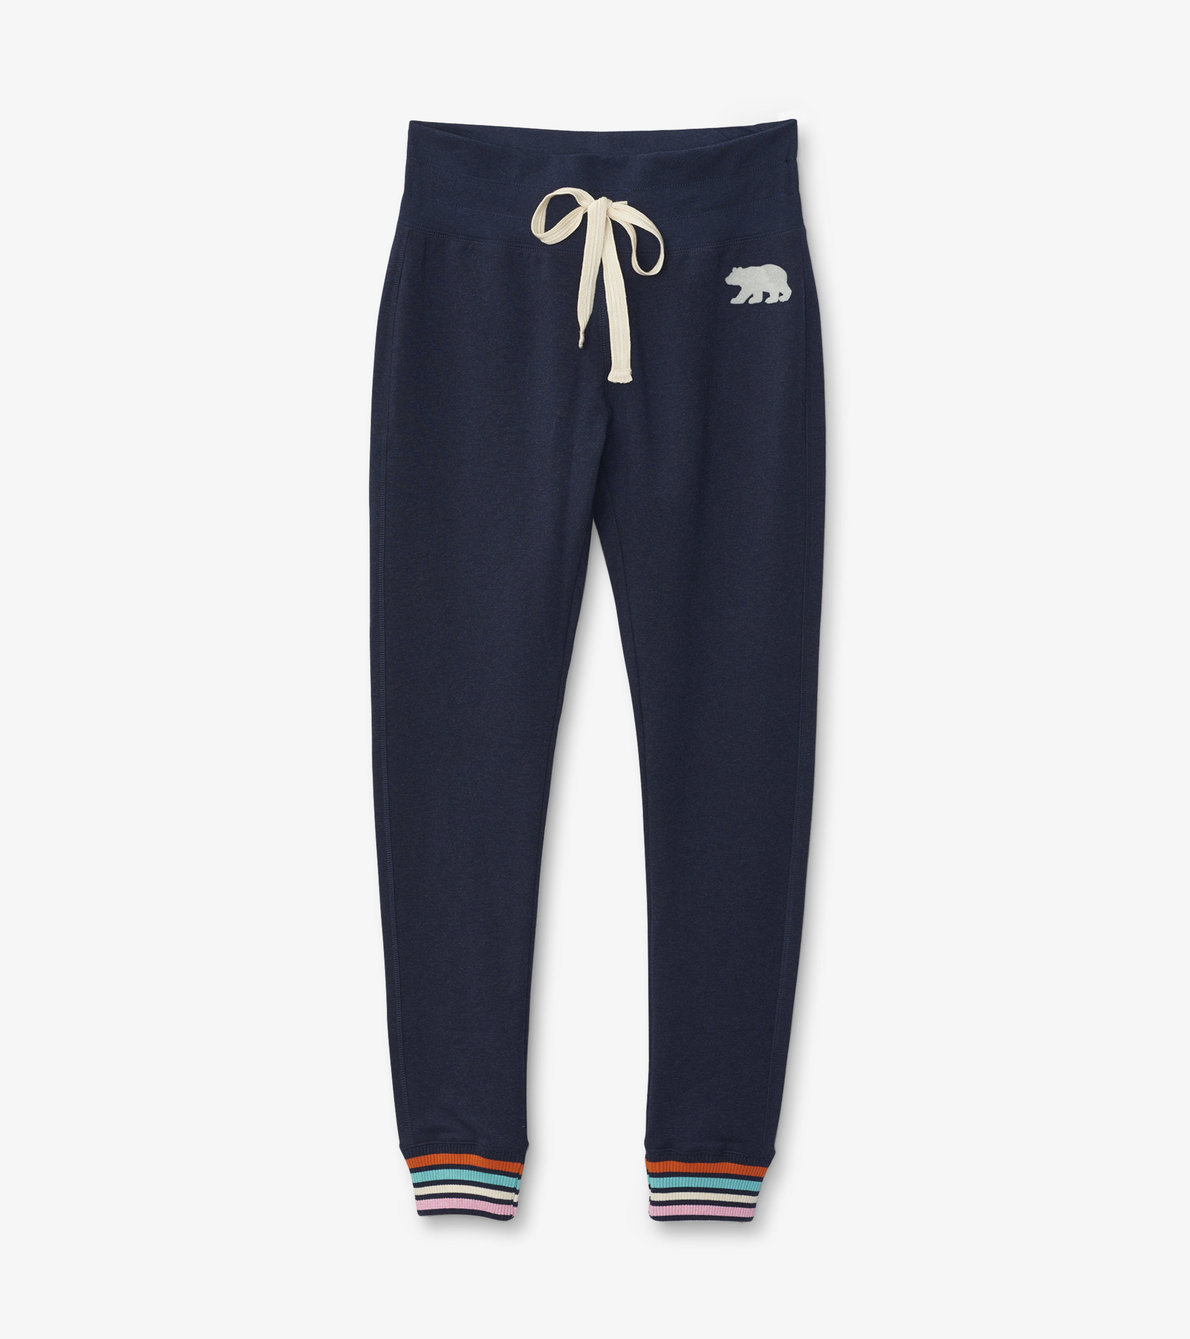 View larger image of Retro Bear Women's Heritage Track Pants